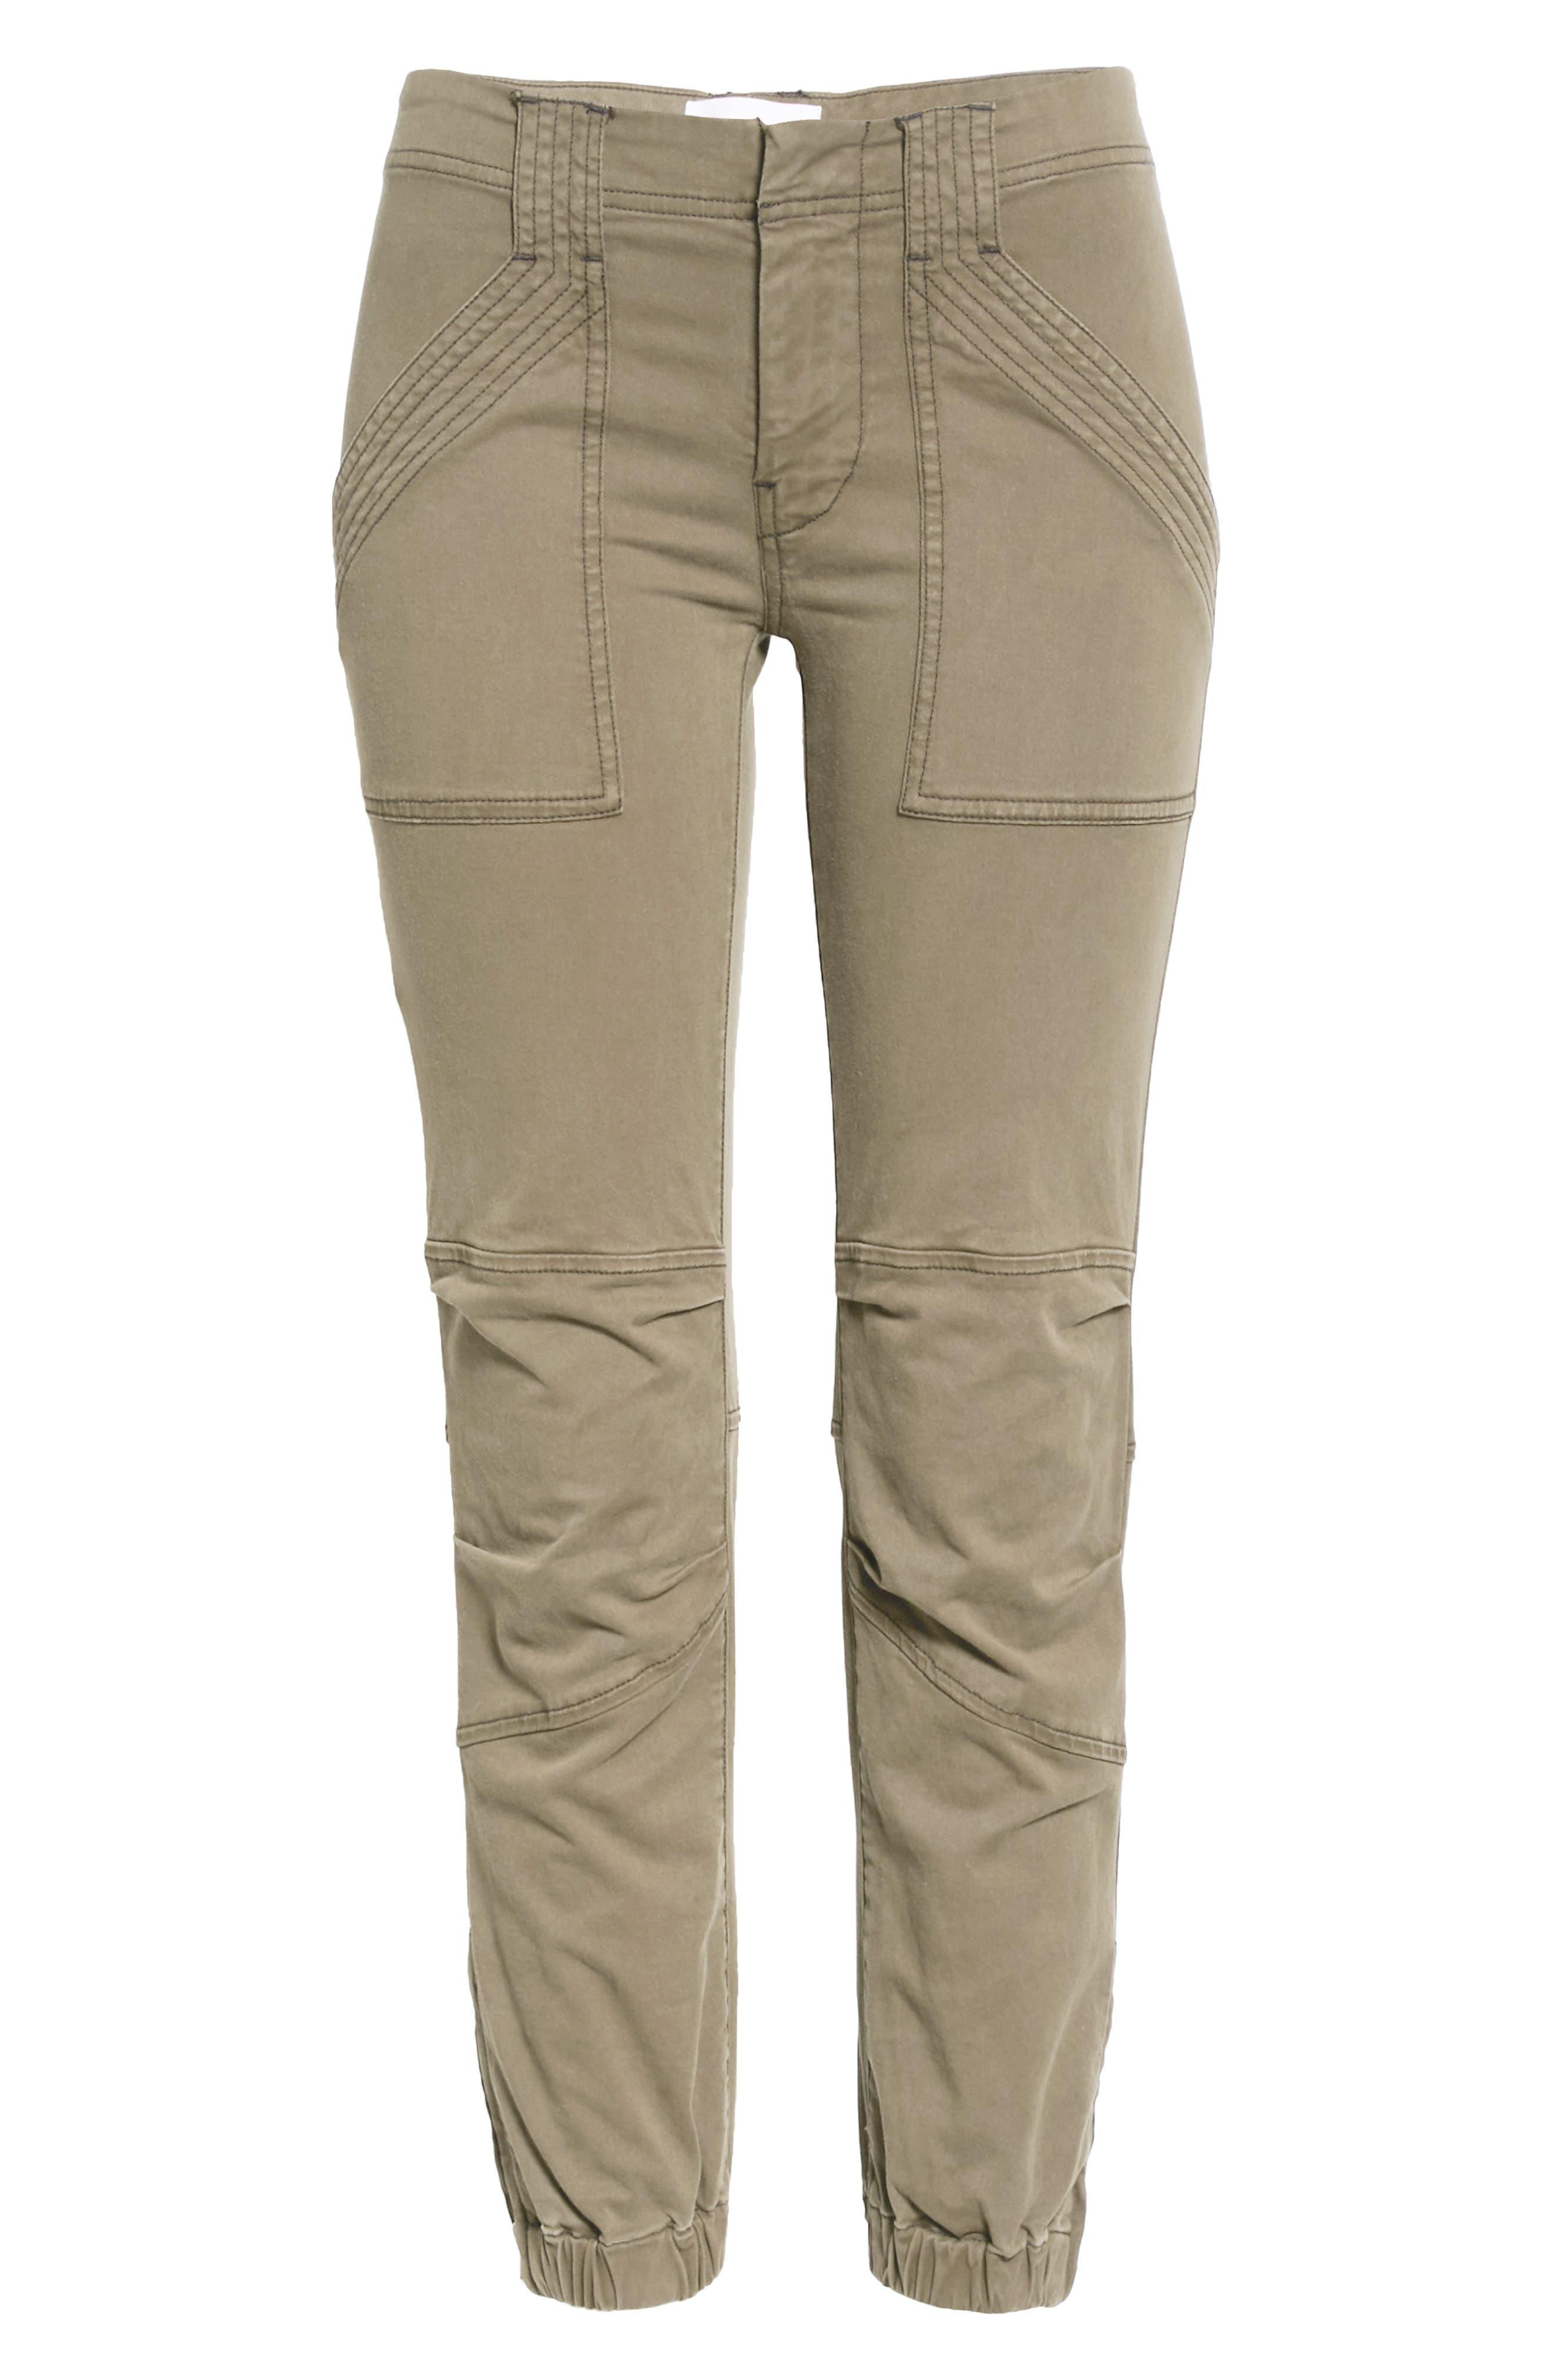 Frame Trapunto Moto Pants with Banded Bottom - ShopStyle